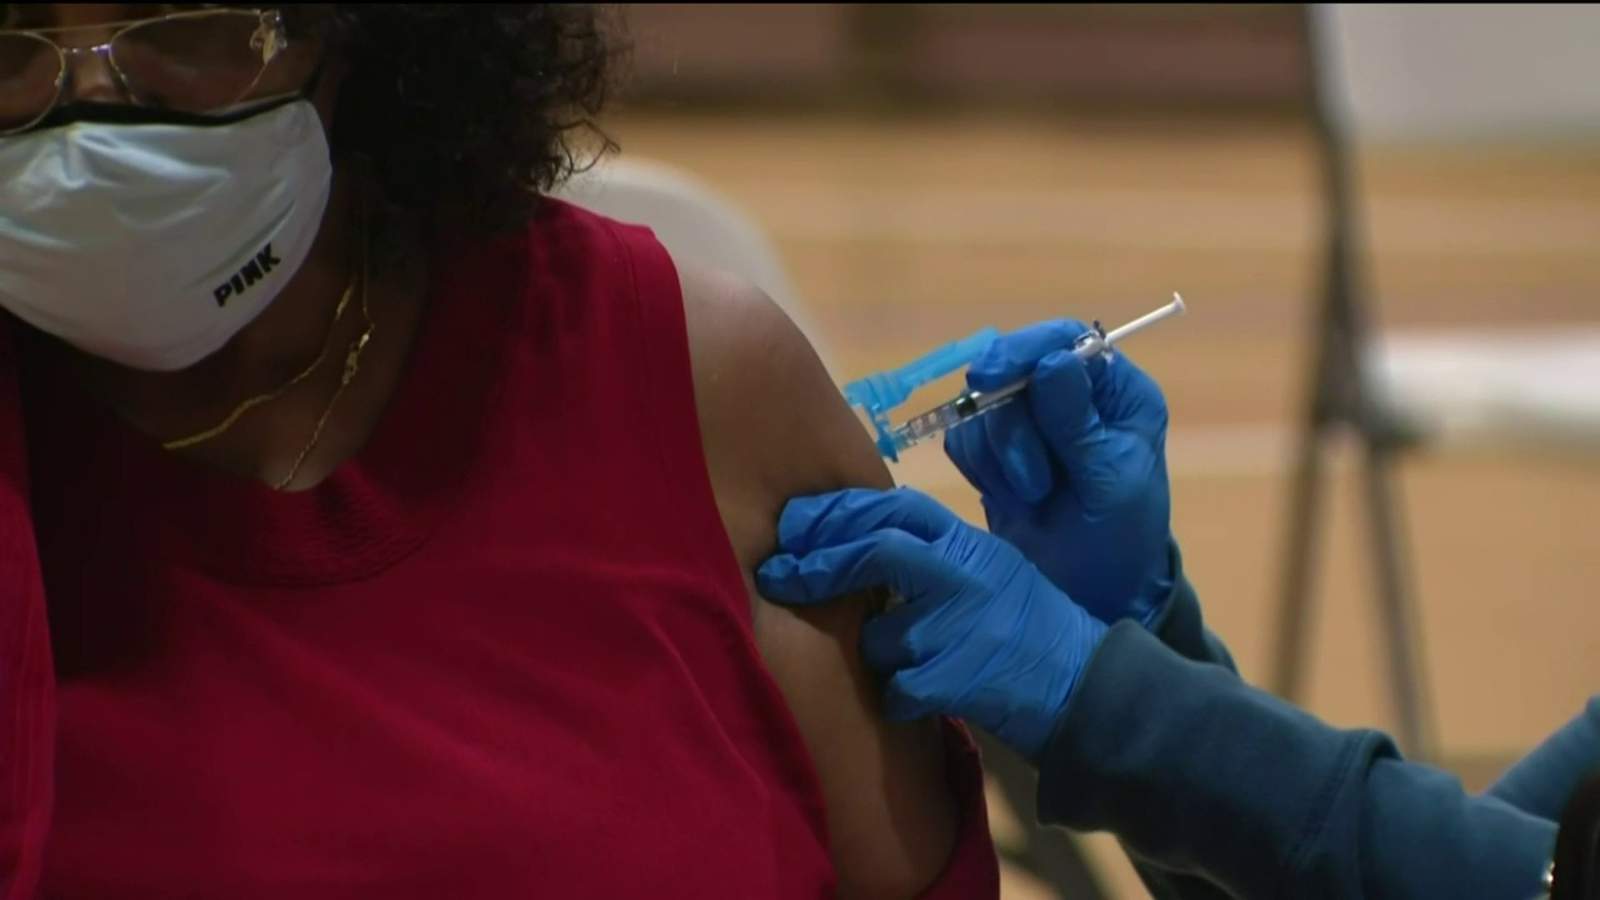 Vaccination efforts continue as number of COVID cases in Michigan rise